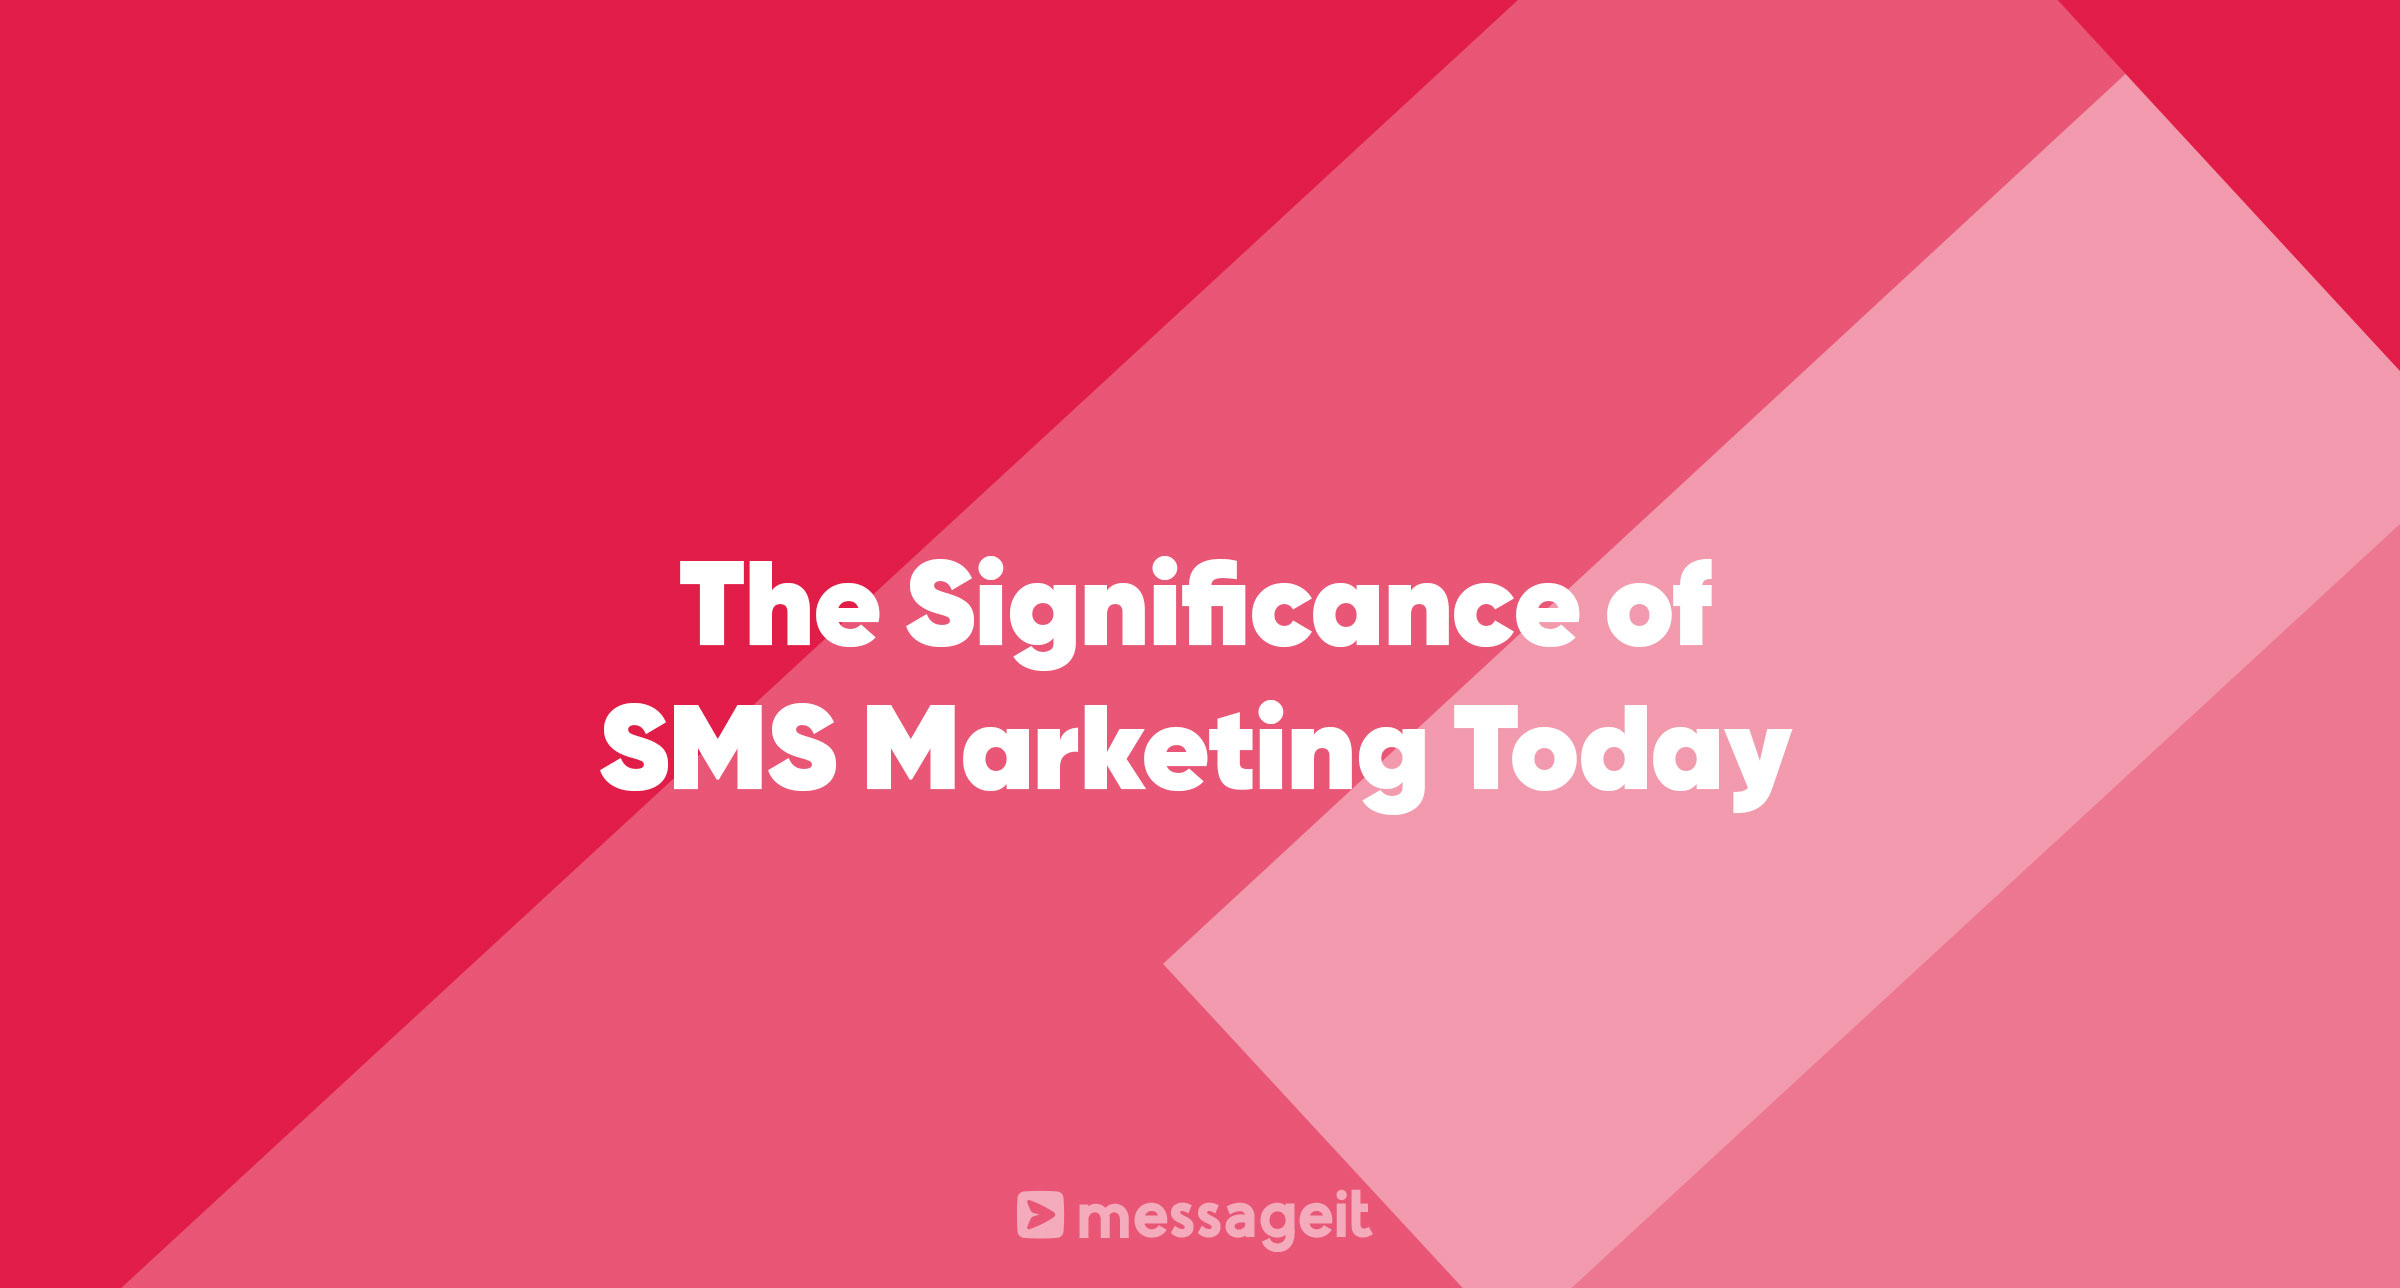 Article | The Significance of SMS Marketing Today